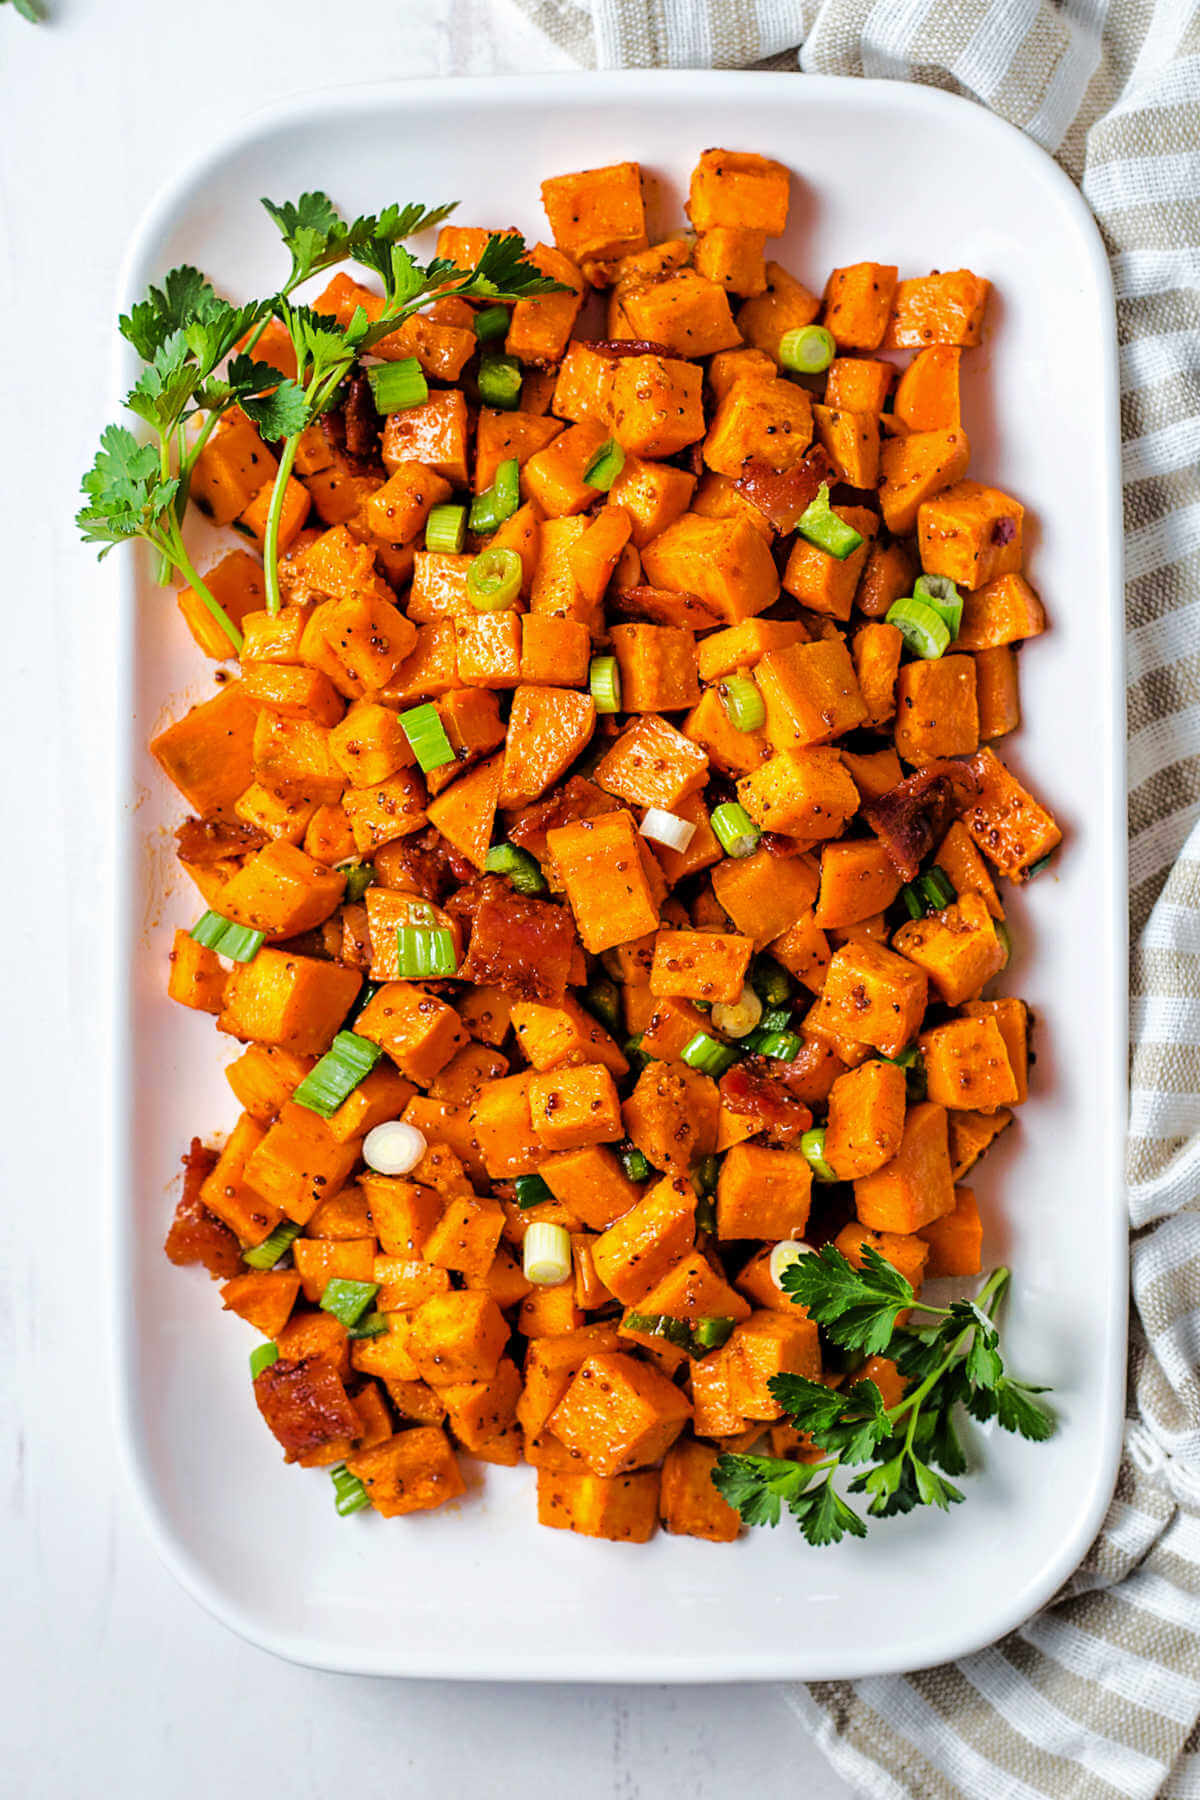 a platter of sweet potato salad garnished with fresh parsley sitting on a table with a linen napkin.